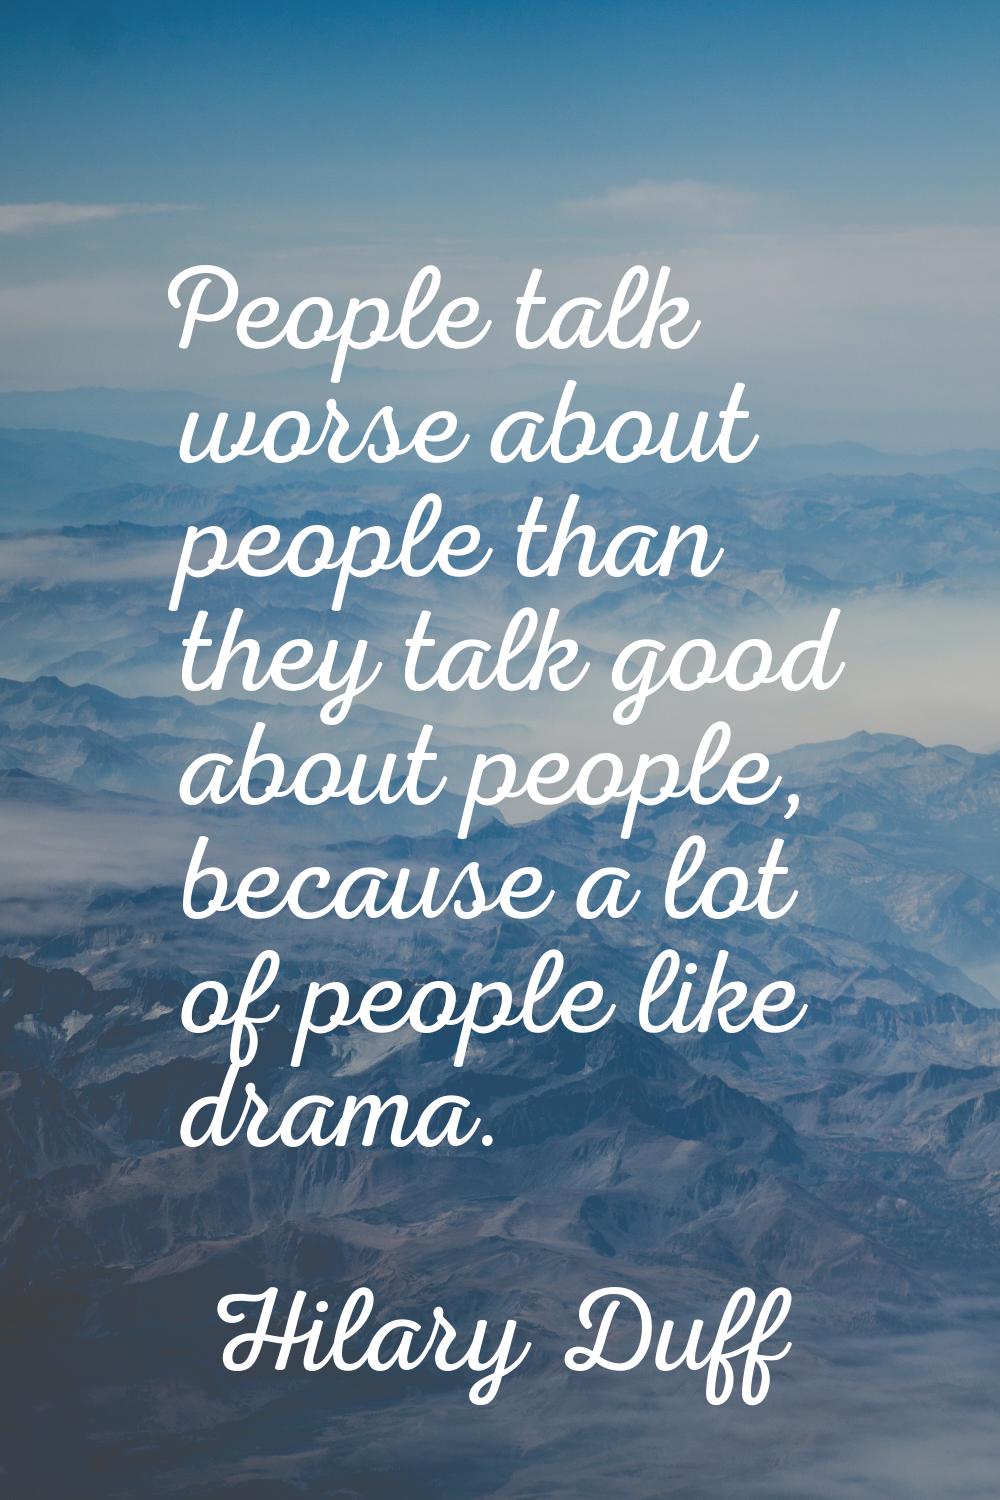 People talk worse about people than they talk good about people, because a lot of people like drama